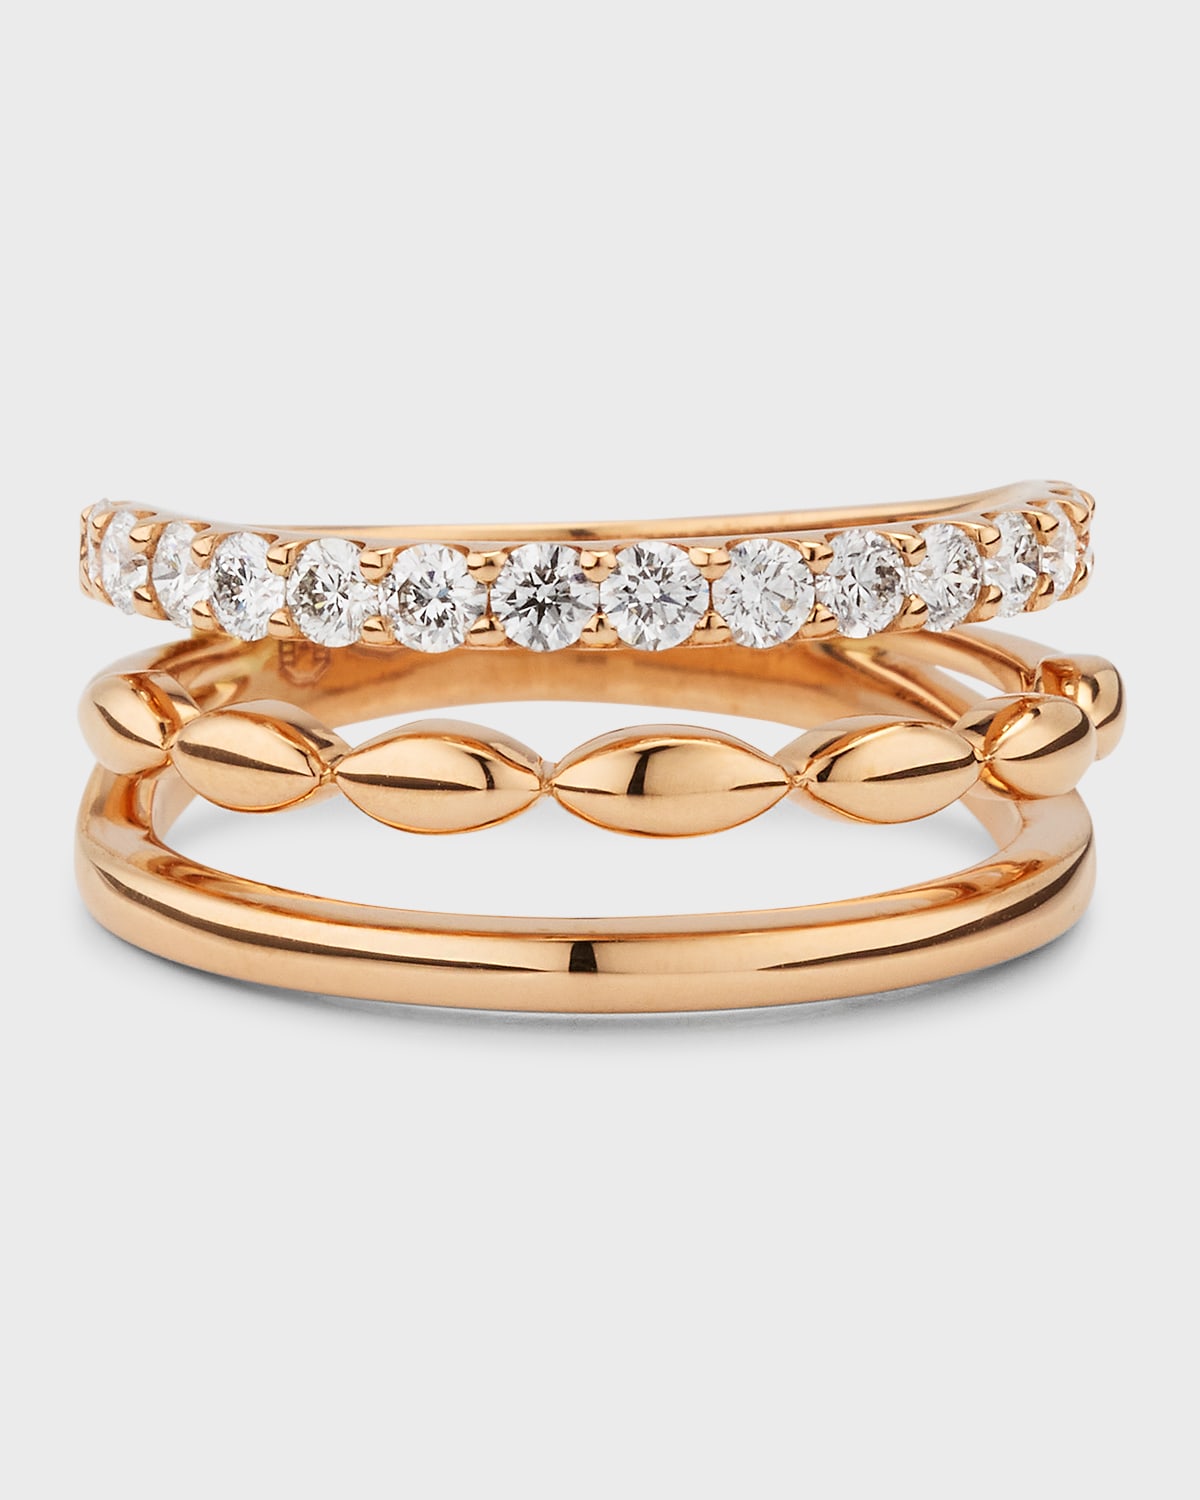 18K Pink Gold 3 Row Ring with Diamonds